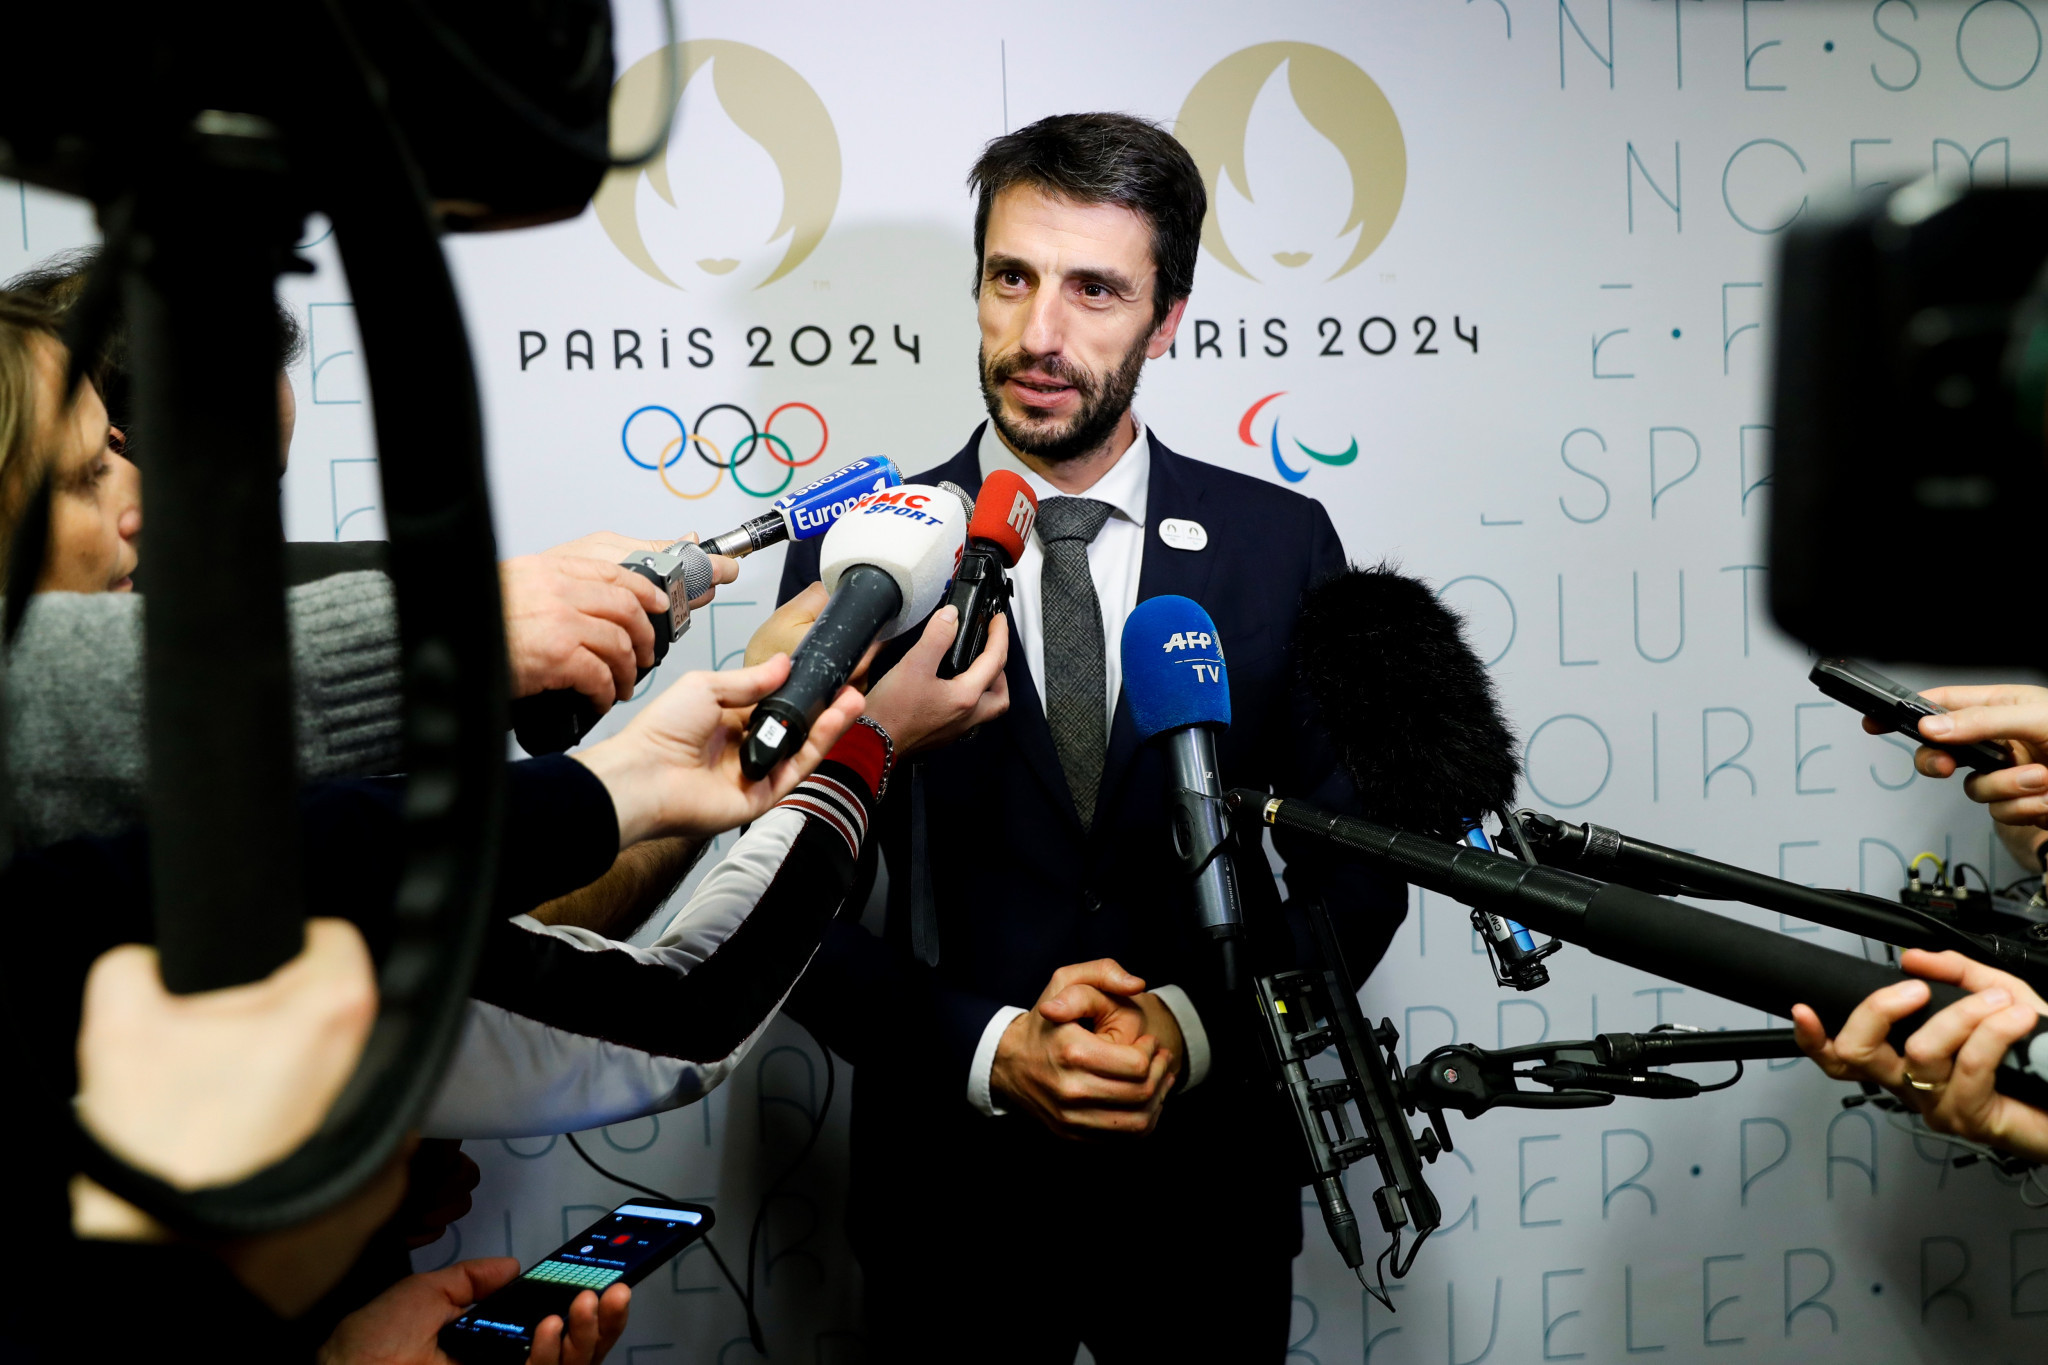 Tony Estanguet has conceded the pandemic "will leave its mark" on Paris 2024 ©Getty Images